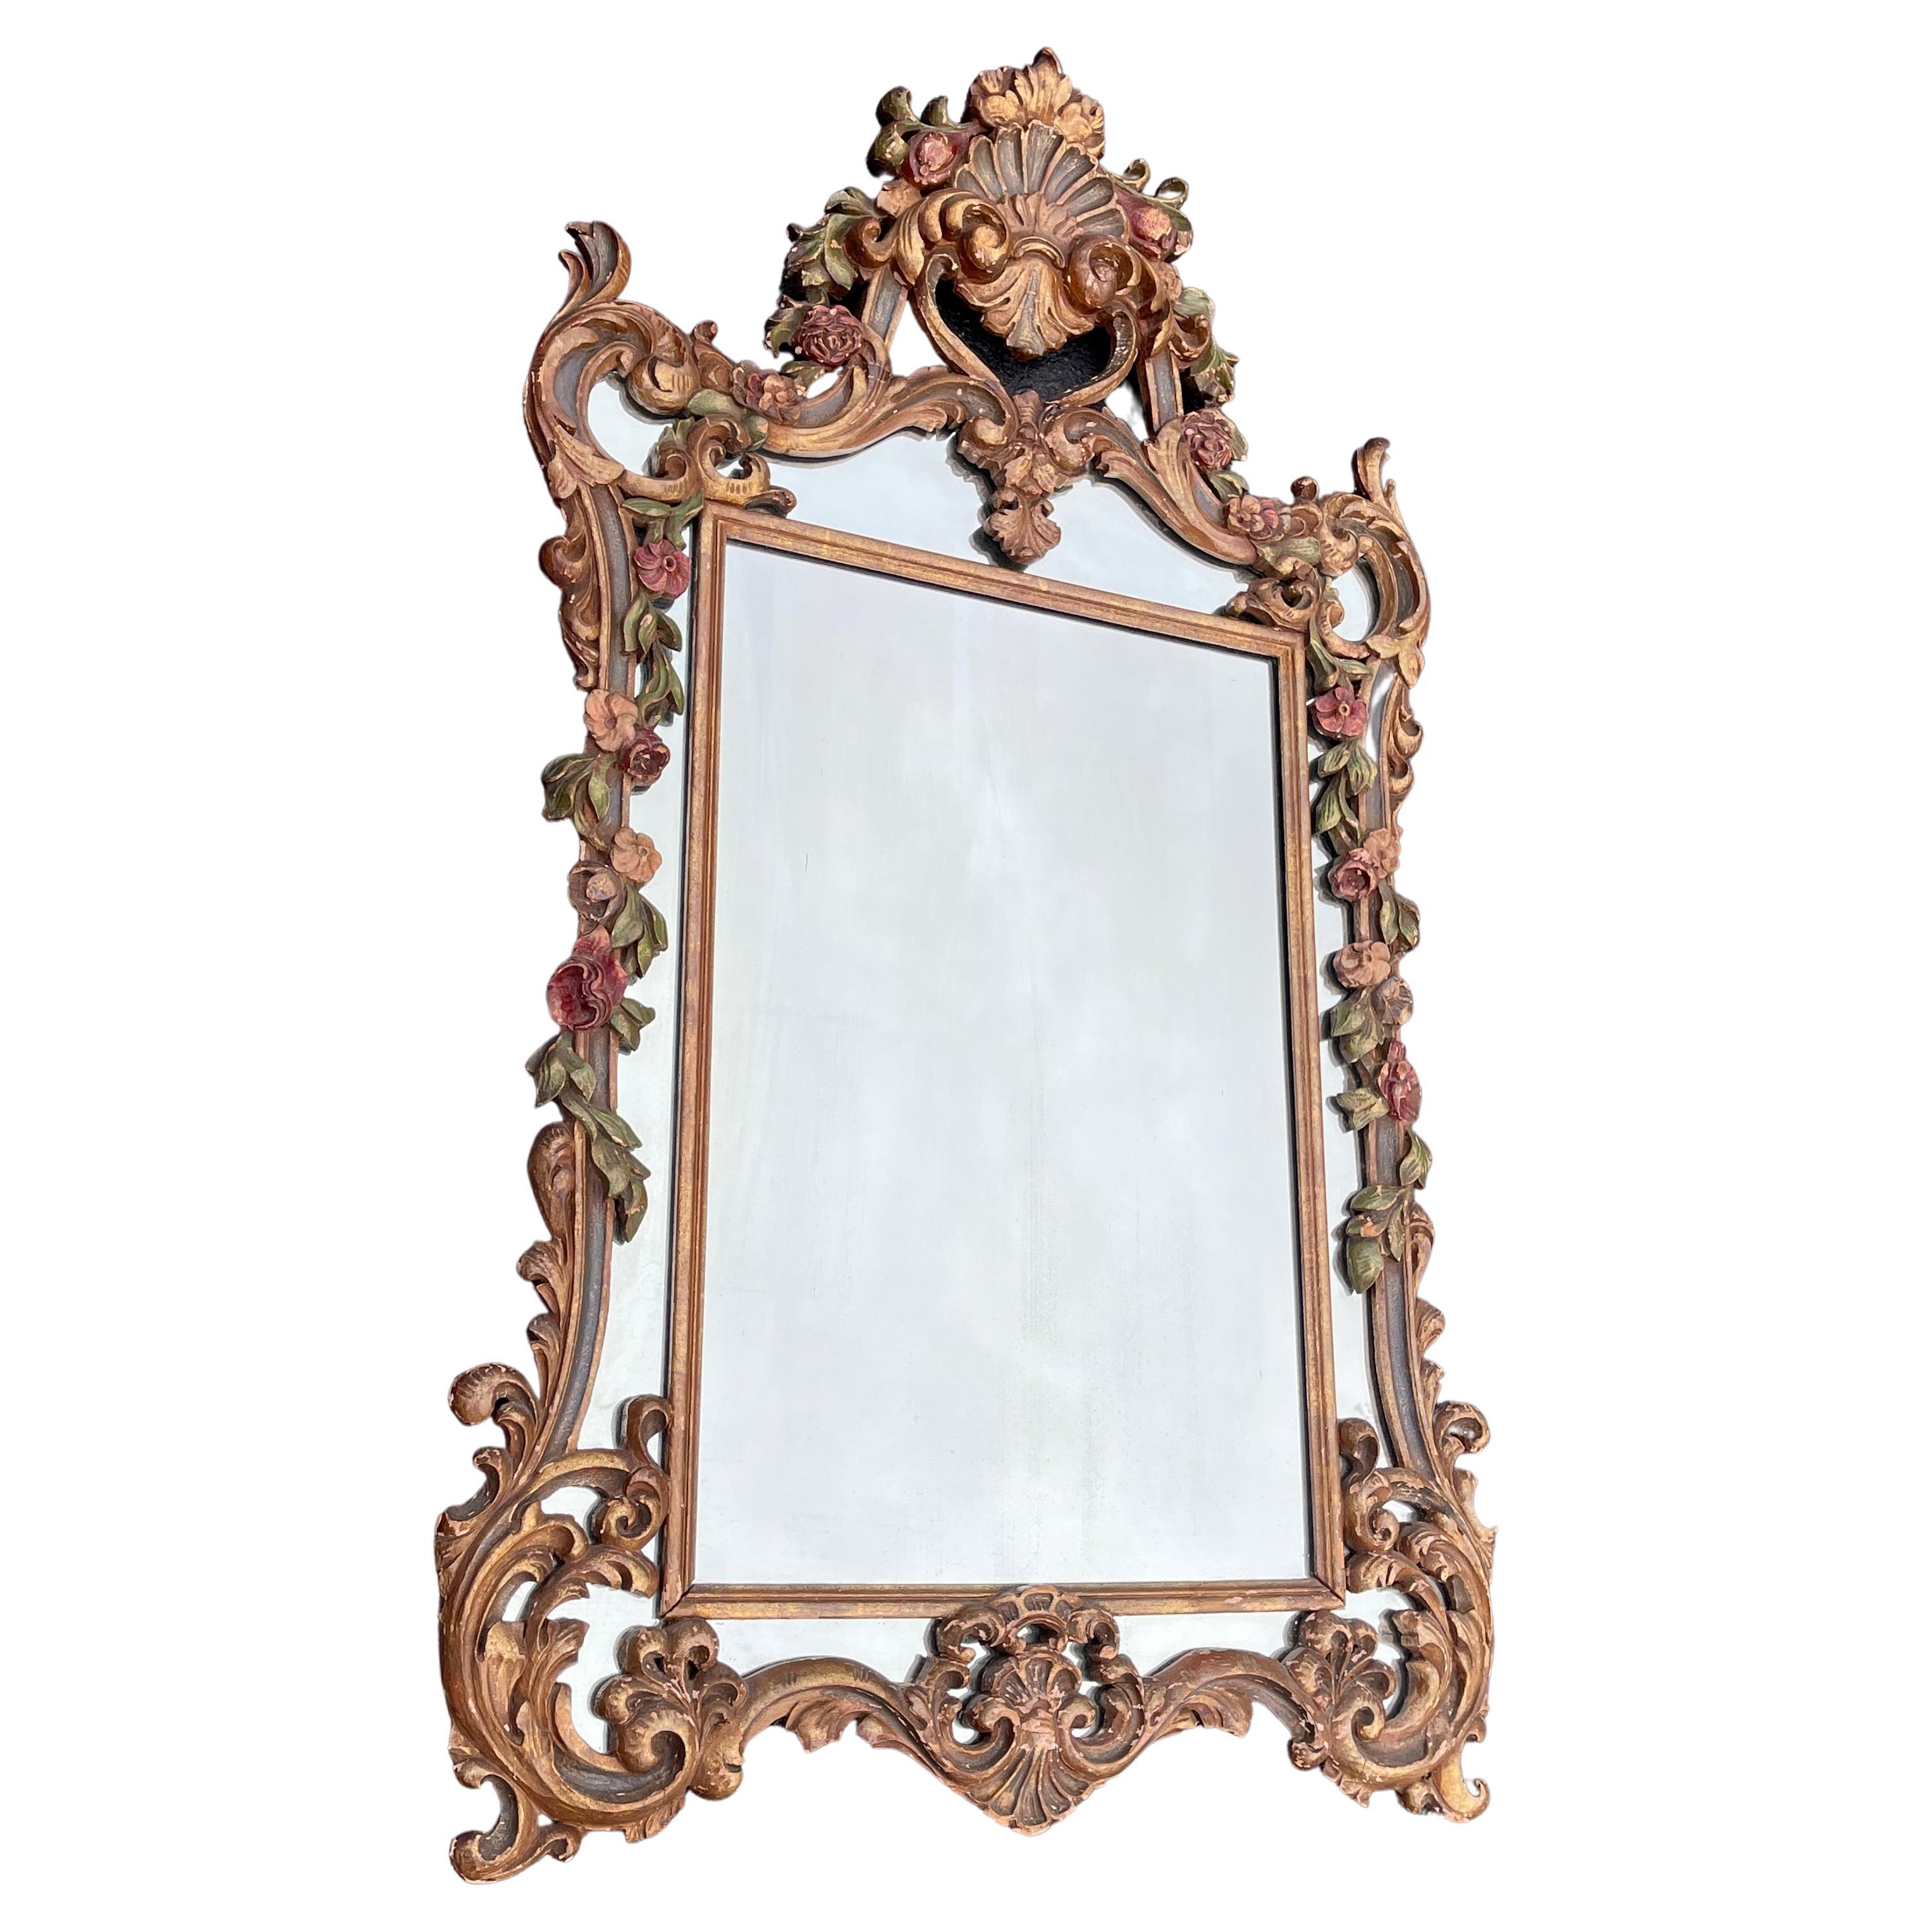 Large French 19th Century Rococo Wall Mirror, Circa 1880.
This mirror was imported by J. B. Van Sciver Co. at the early part of 20th Century. The mirror has some wear to the wood and gilding but also has amazing patina, please see enclosed detailed